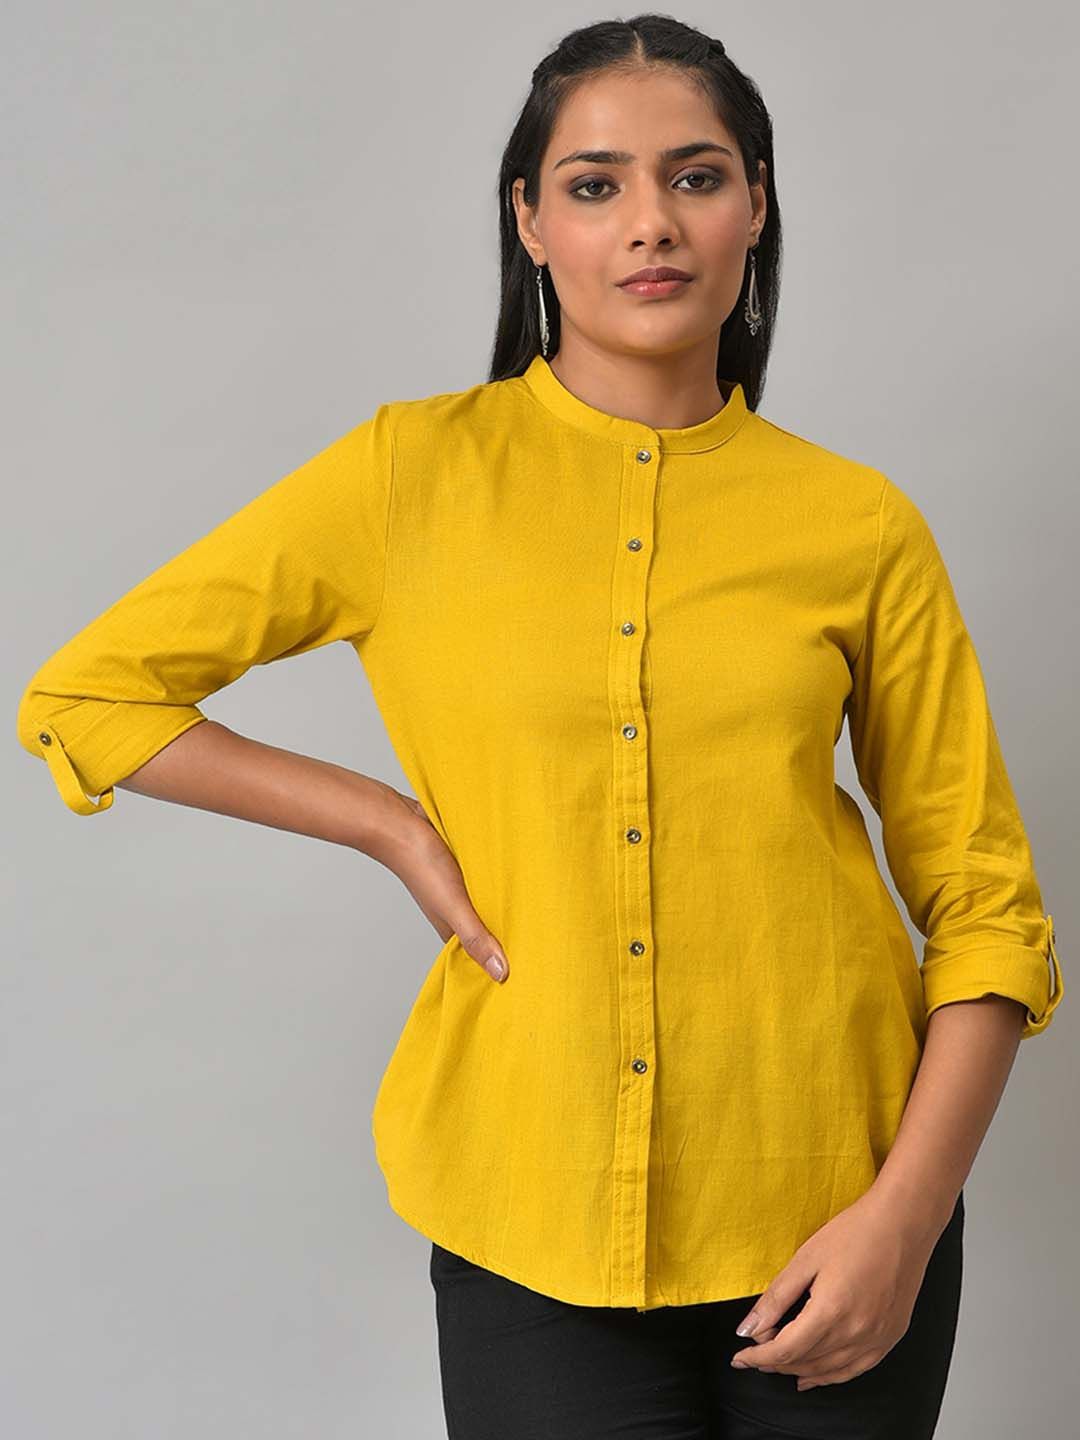 W Mustard Mandarin Collar Roll-Up Sleeves Shirt Style Cotton Top Price in India